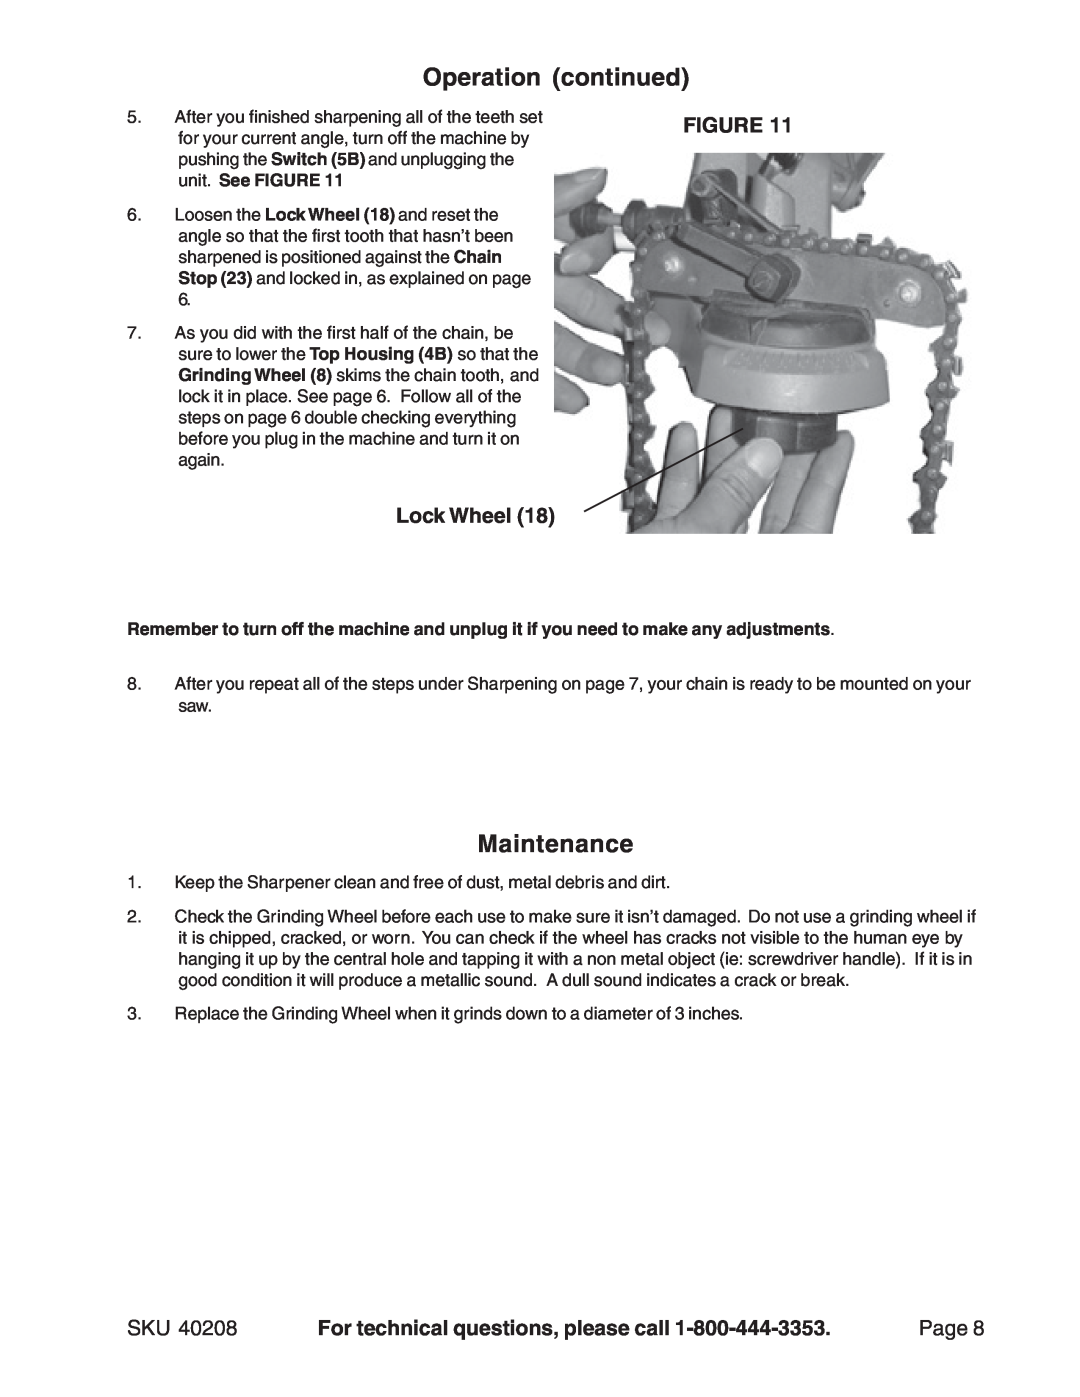 Harbor Freight Tools 40208 manual Maintenance, Operation continued, Lock Wheel, For technical questions, please call, Page 